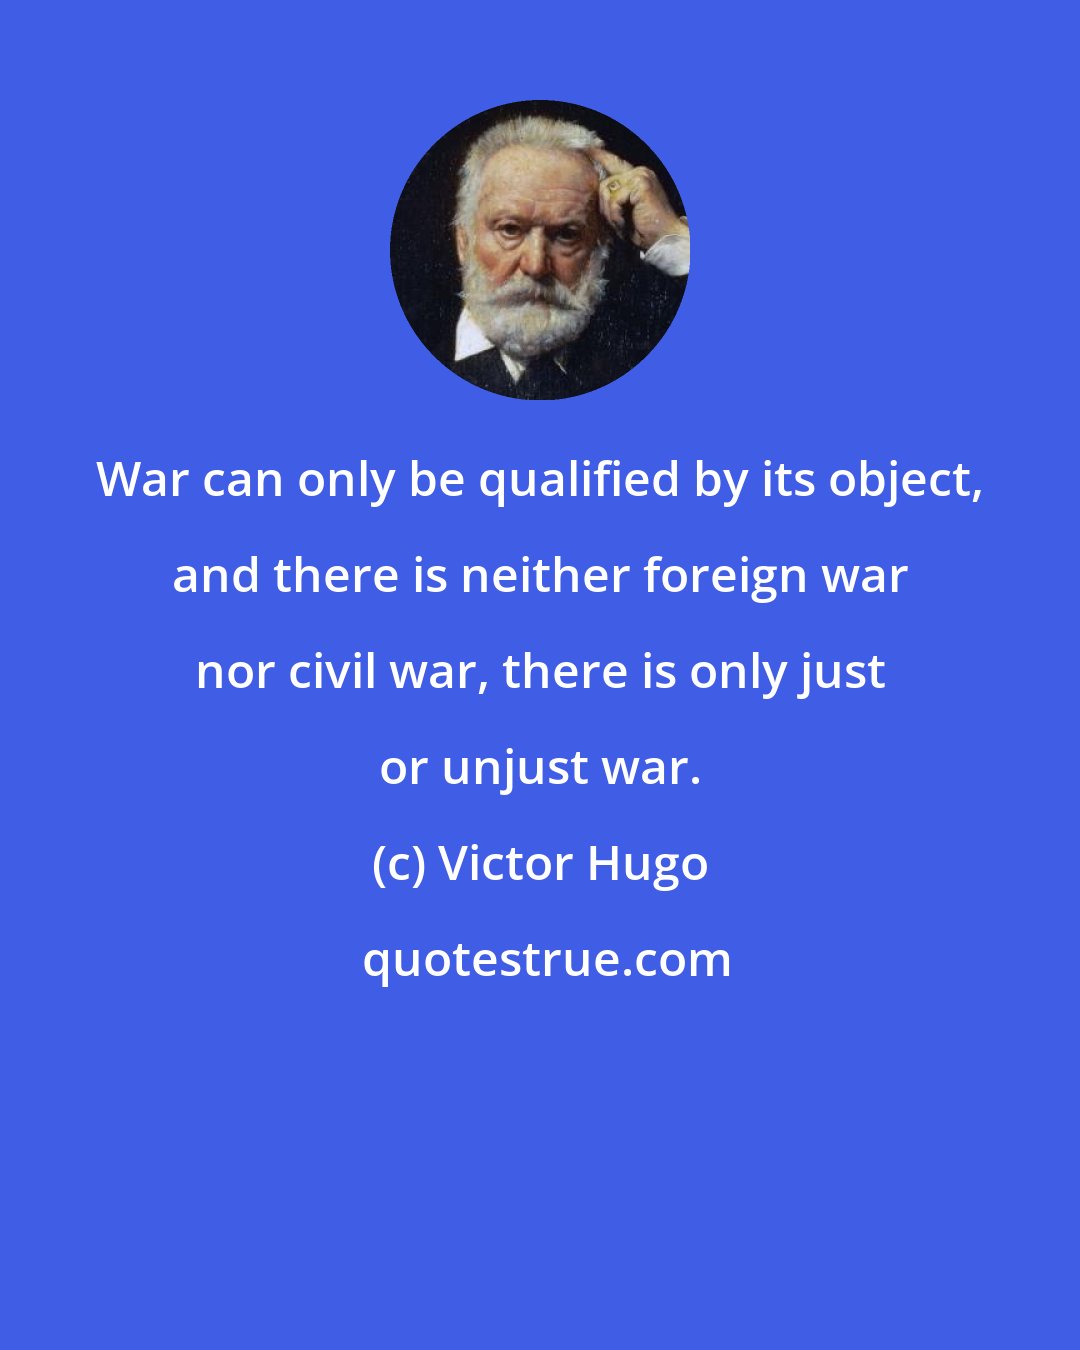 Victor Hugo: War can only be qualified by its object, and there is neither foreign war nor civil war, there is only just or unjust war.